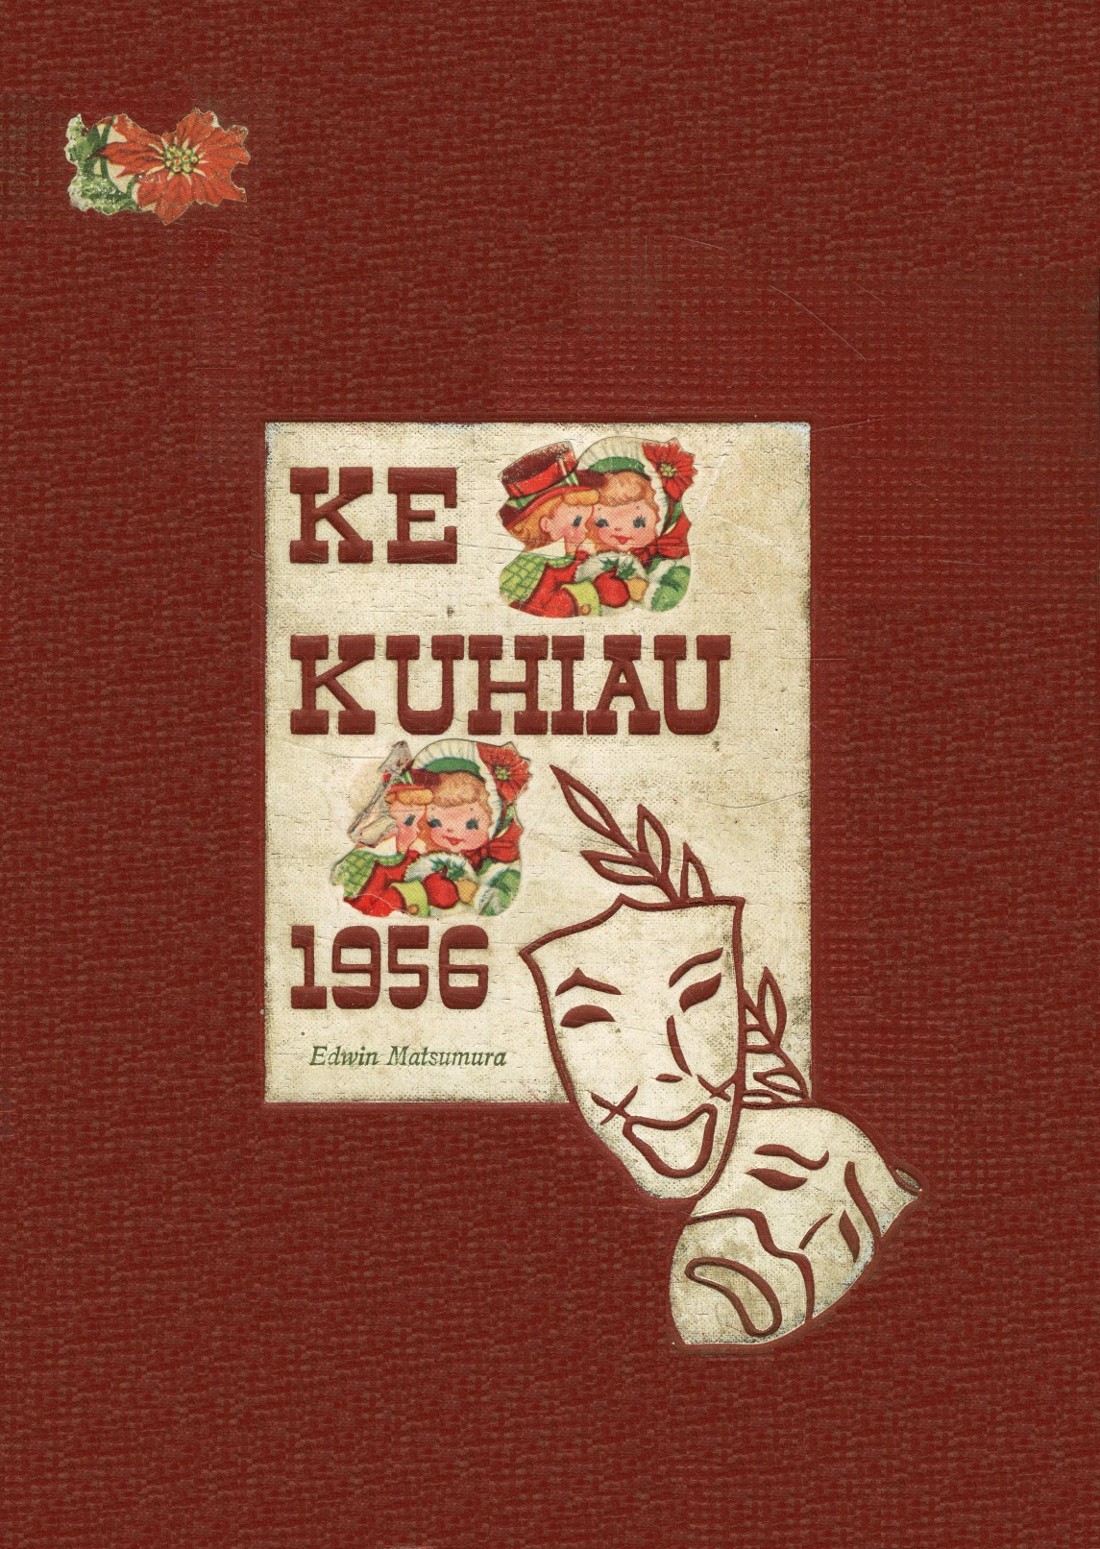 1956 yearbook from Kauai High School from Lihue, Hawaii for sale